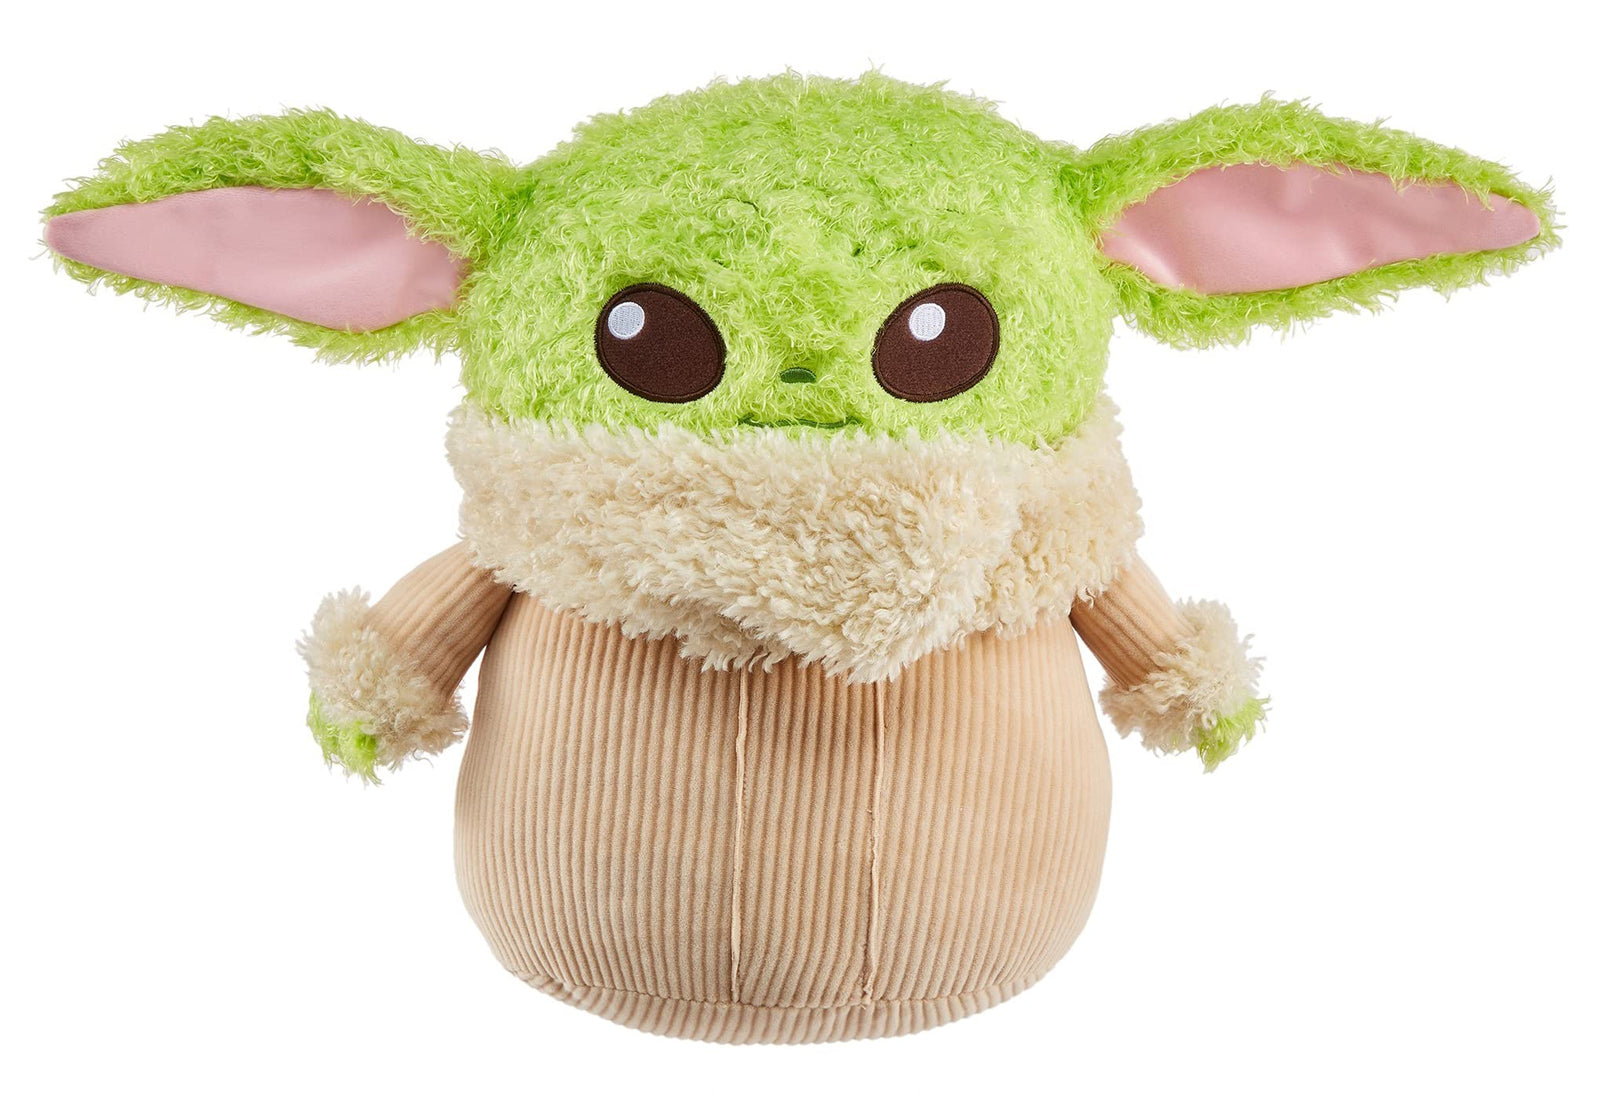 Star Wars Grogu Soft ‘N Fuzzy Plush, Fan Favorite Character, Push Hand & It Makes Noises, Collectible Gift for Fans, Collectors & Kids 3 Years & Up [Amazon Exclusive]